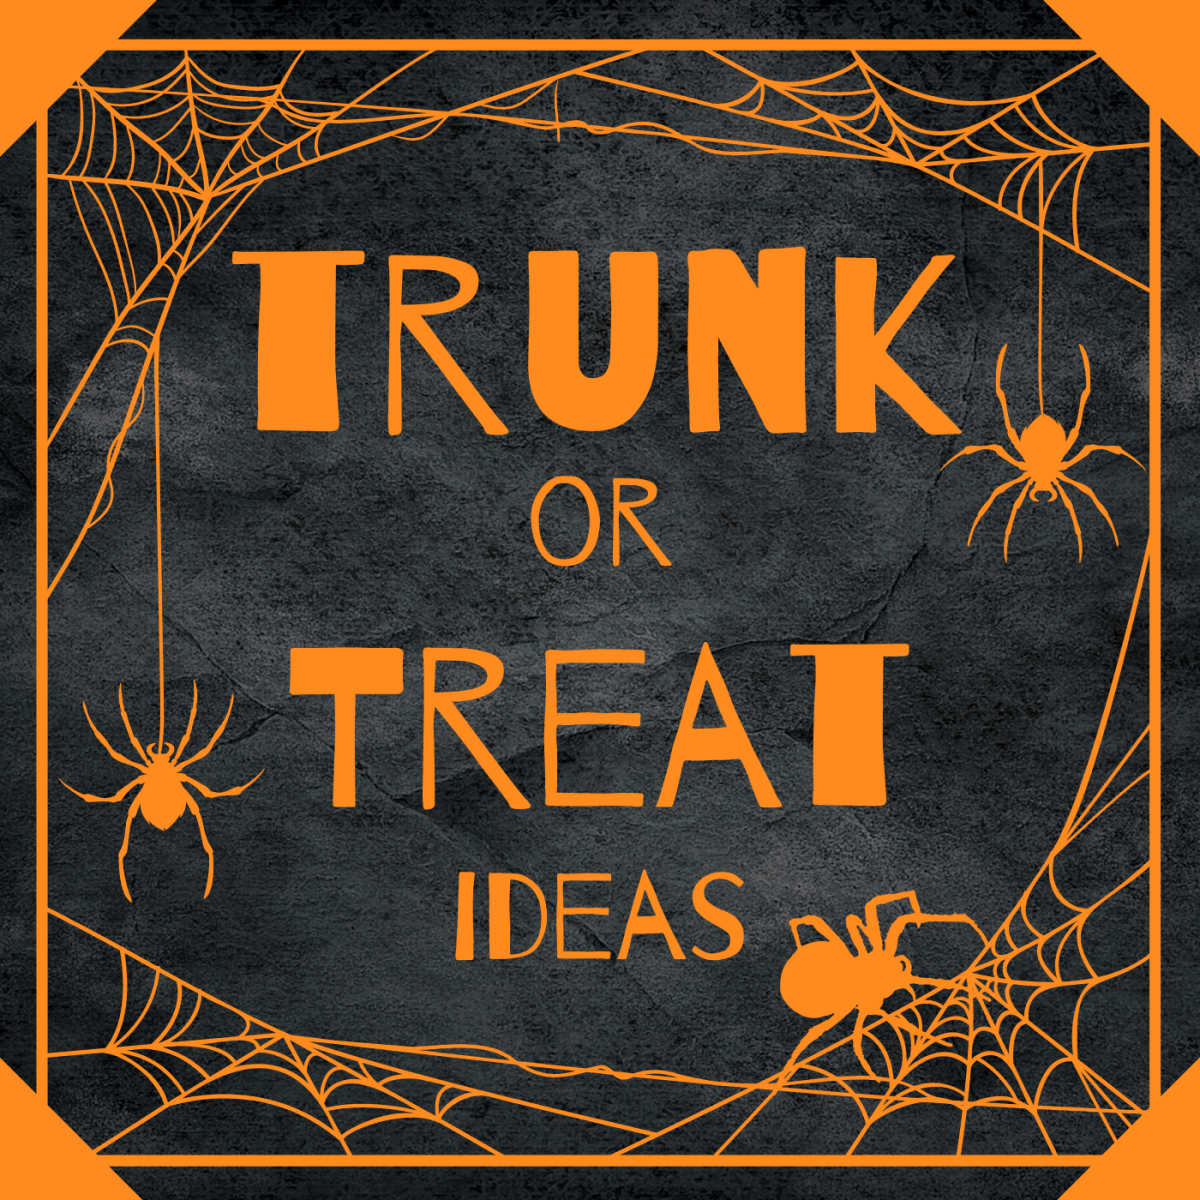 75+ Awesome Trunk or Treat Ideas for Cars